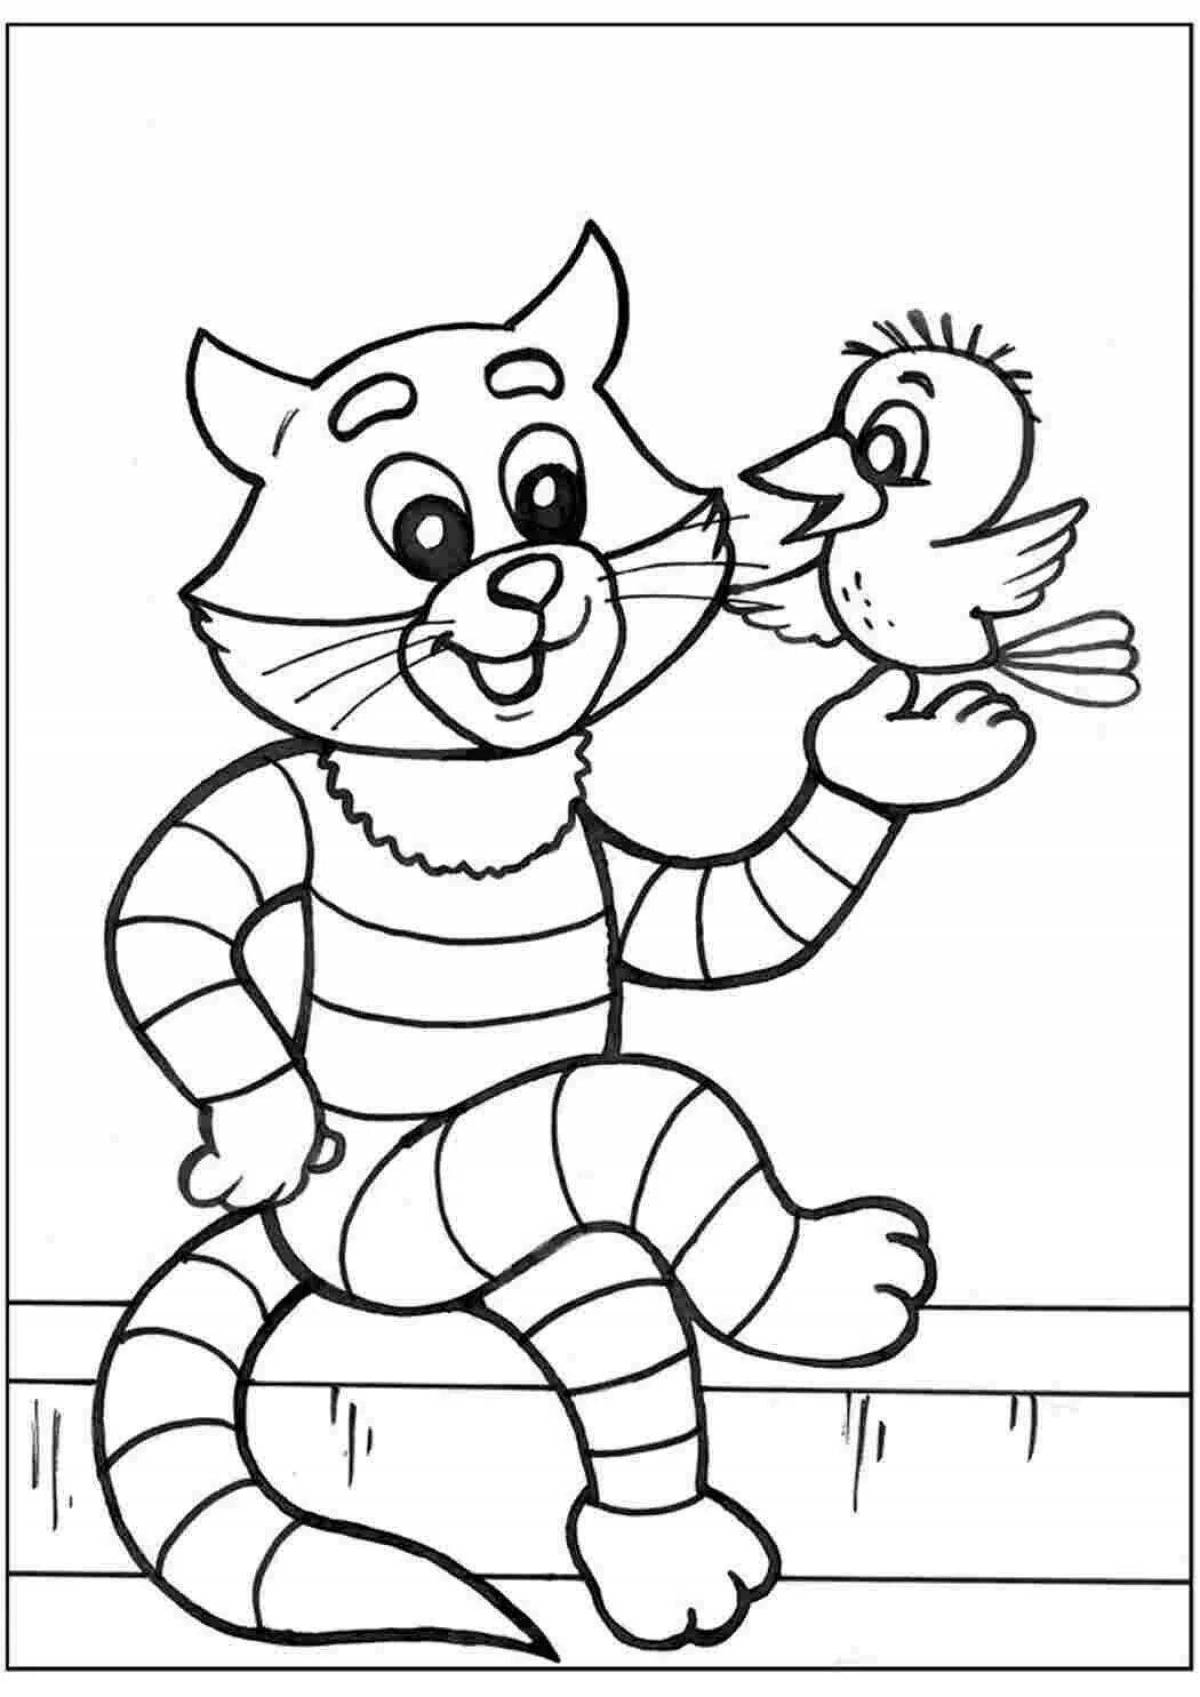 Glowing sailor skin coloring page for beginners